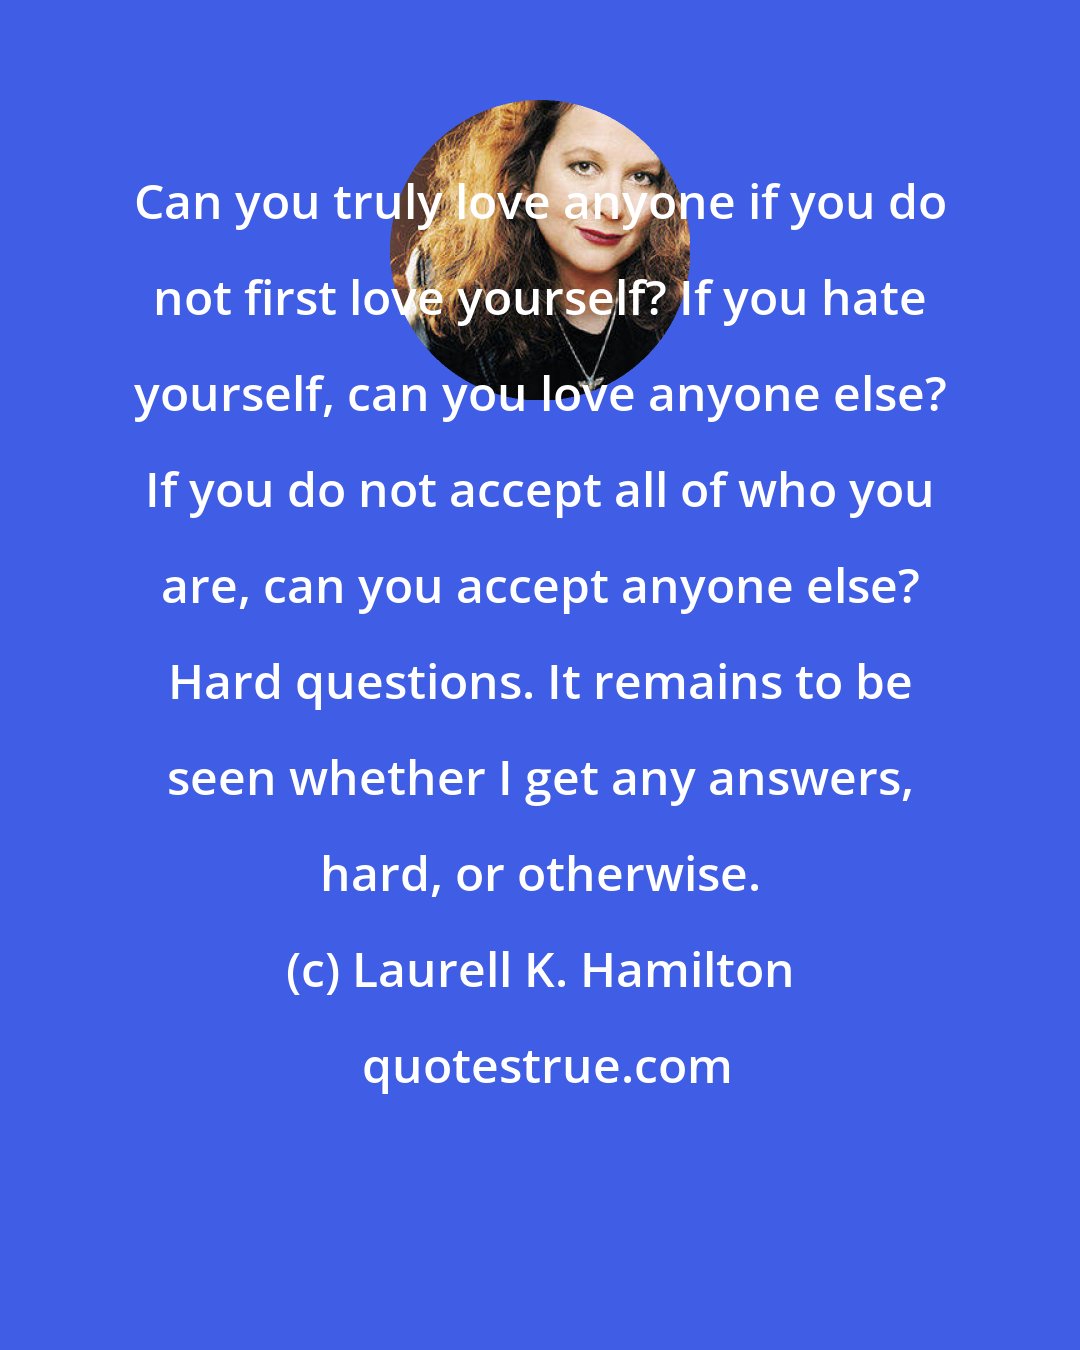 Laurell K. Hamilton: Can you truly love anyone if you do not first love yourself? If you hate yourself, can you love anyone else? If you do not accept all of who you are, can you accept anyone else? Hard questions. It remains to be seen whether I get any answers, hard, or otherwise.